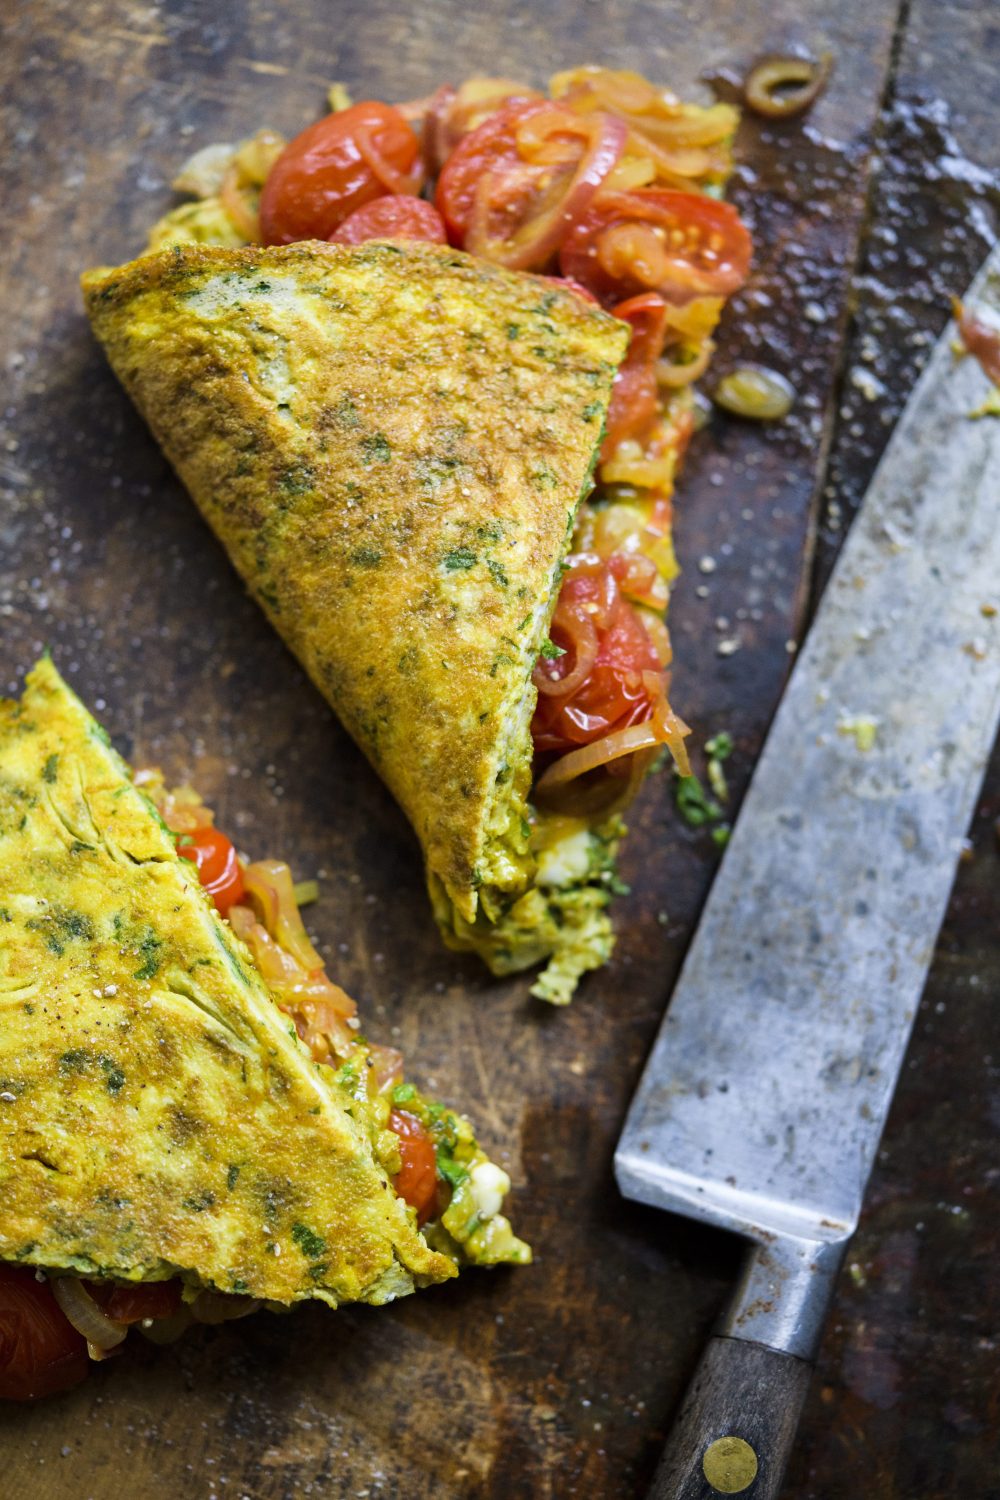 Cilantro-Tomato Omelet with Turmeric Butter